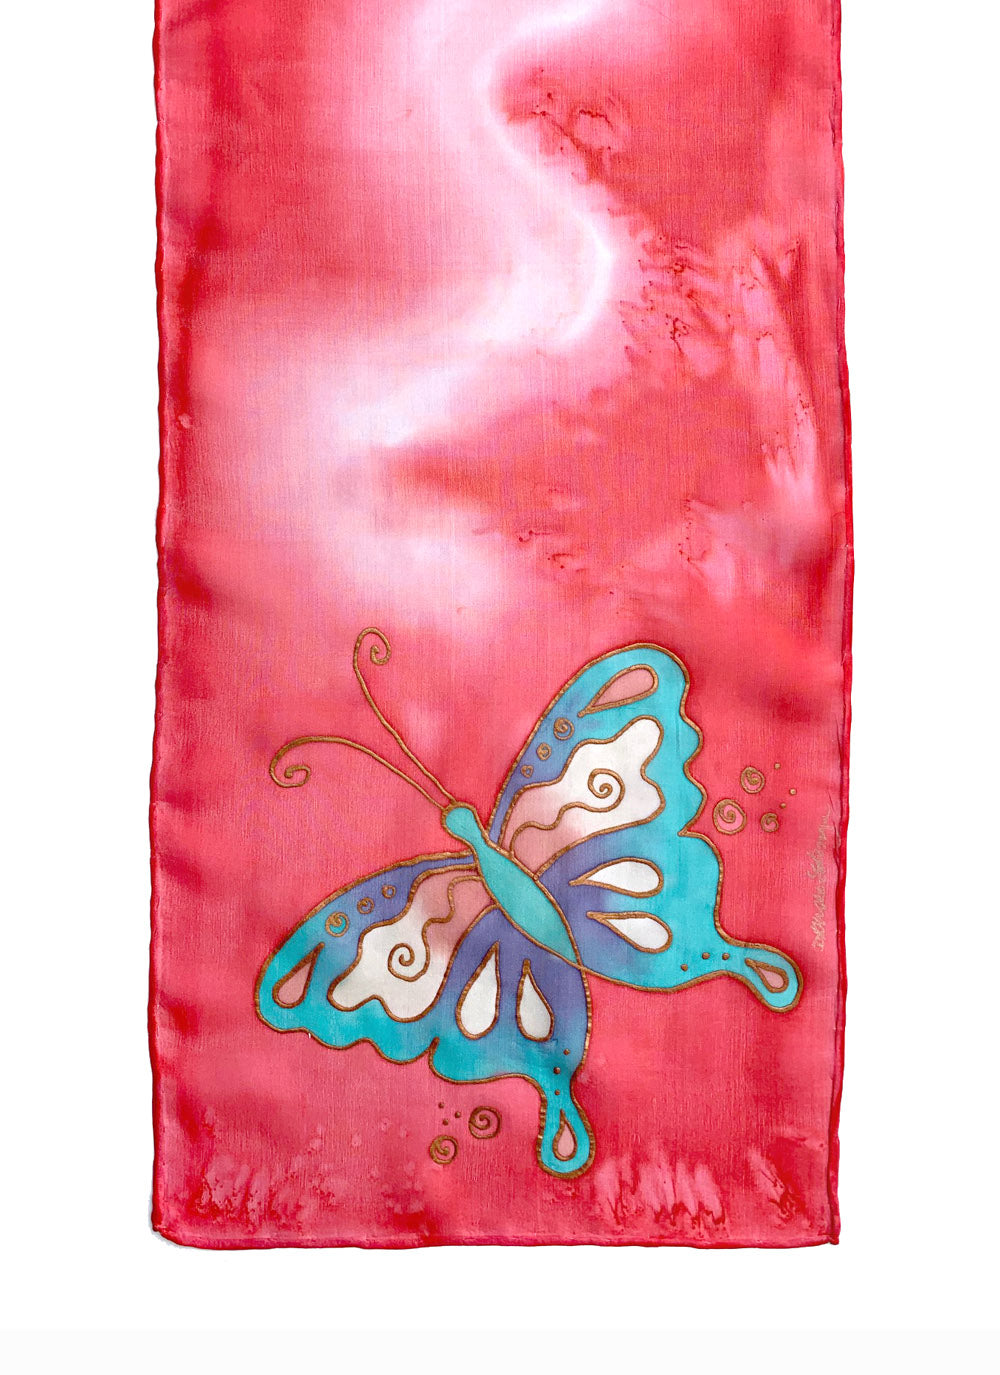 Silk scarf with butterfly design shown in carnation pink